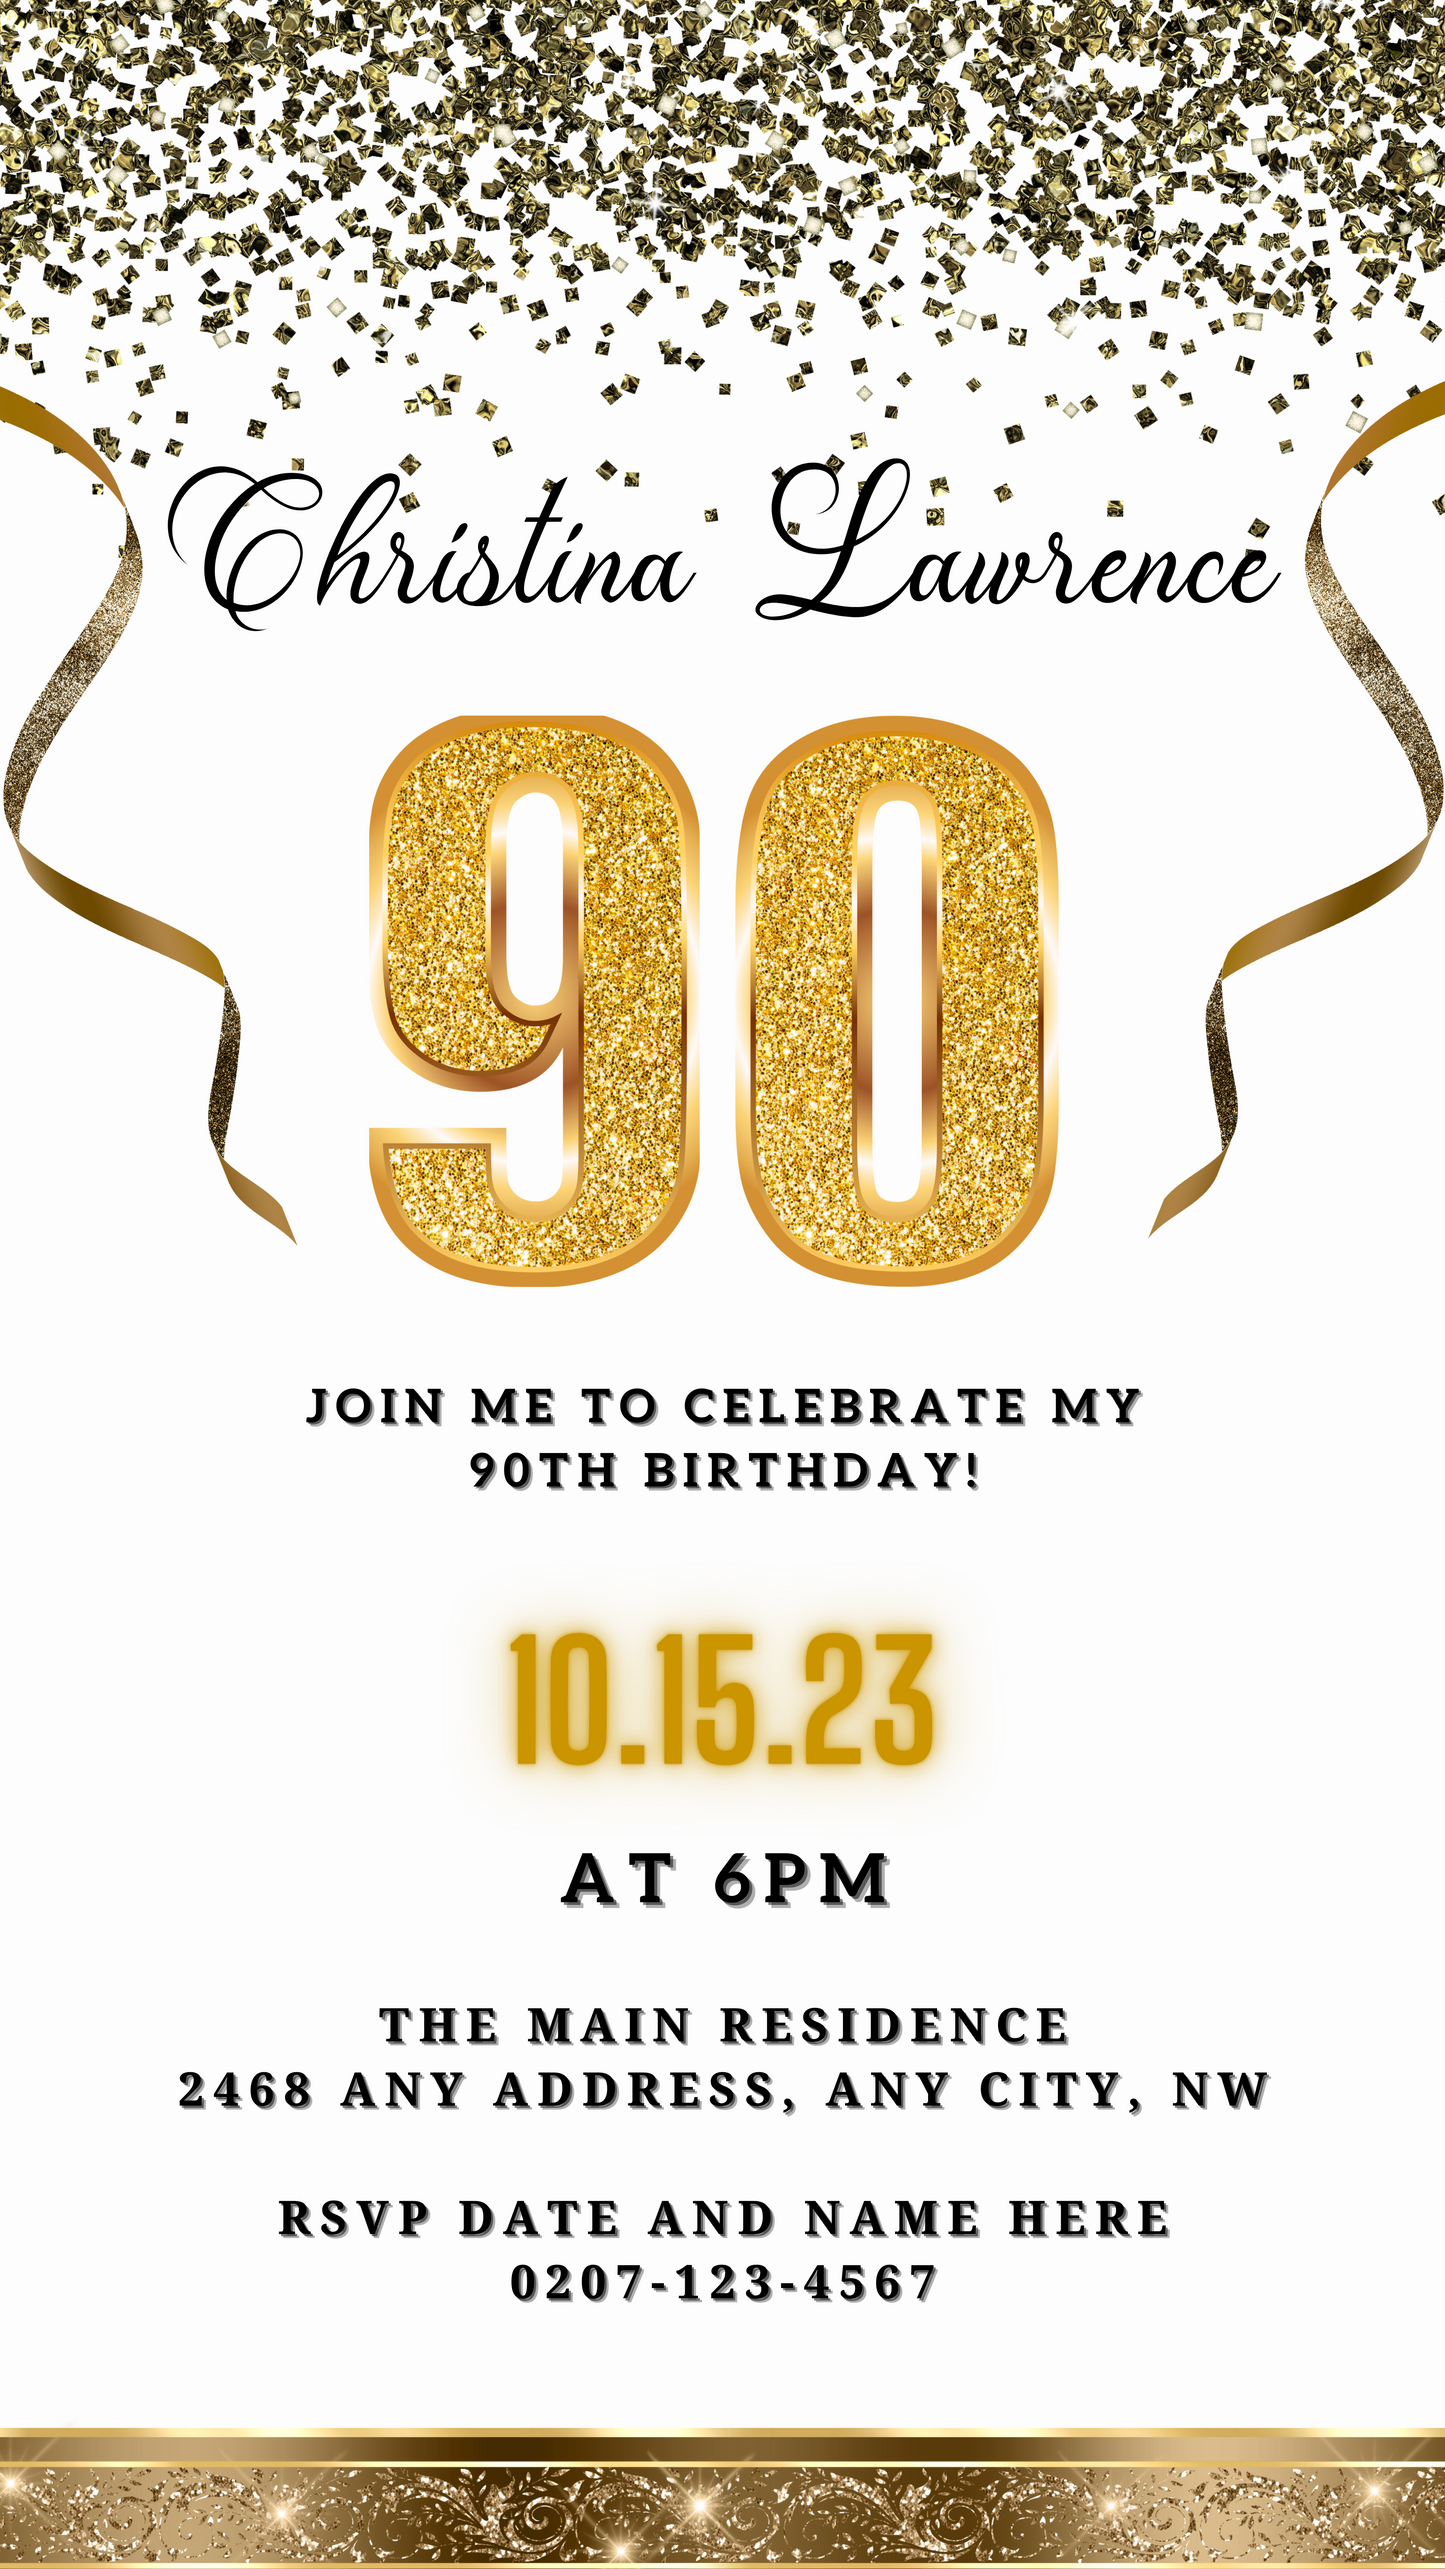 White Gold Confetti 90th Birthday Evite featuring gold numbers and glittery ribbons, customizable via Canva for digital invitations.